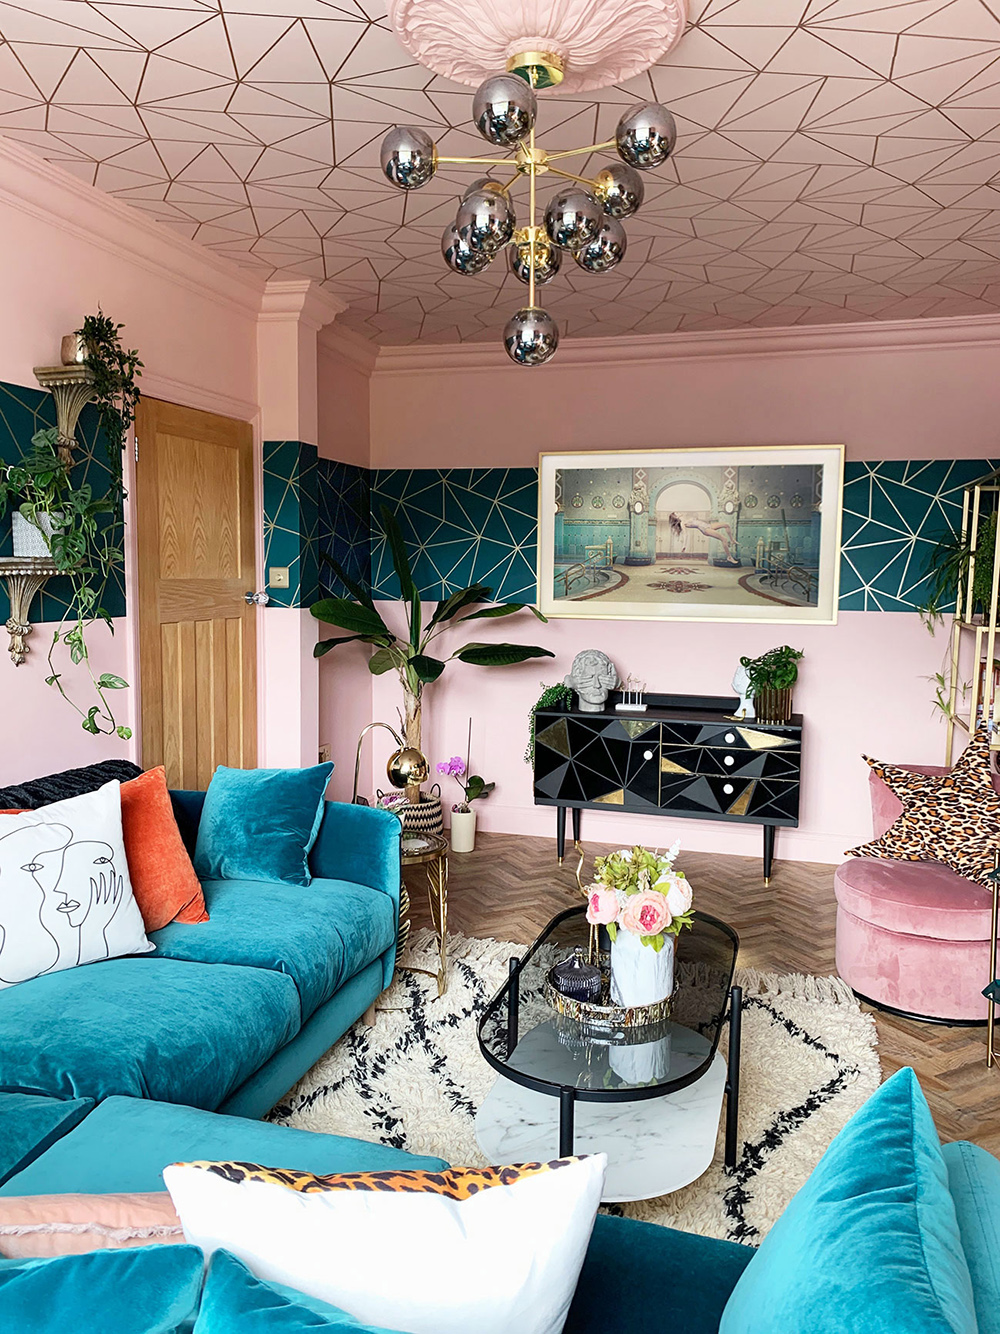 Pink and teal eclectic living room with geometric wallpaper and velvet furniture